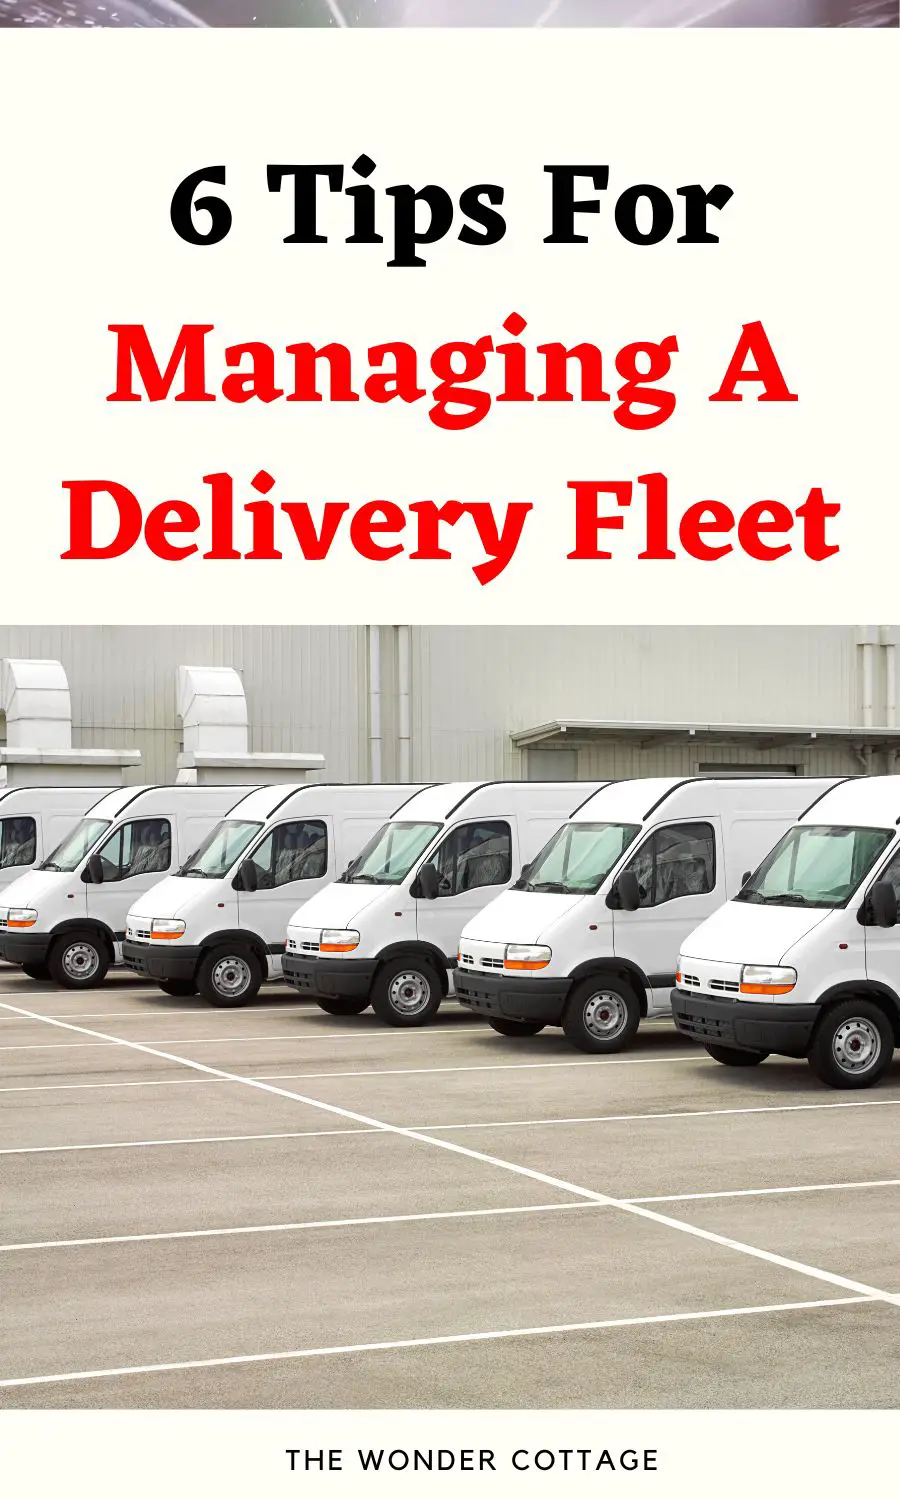 Managing A Delivery Fleet: 6 Tips For Small Business